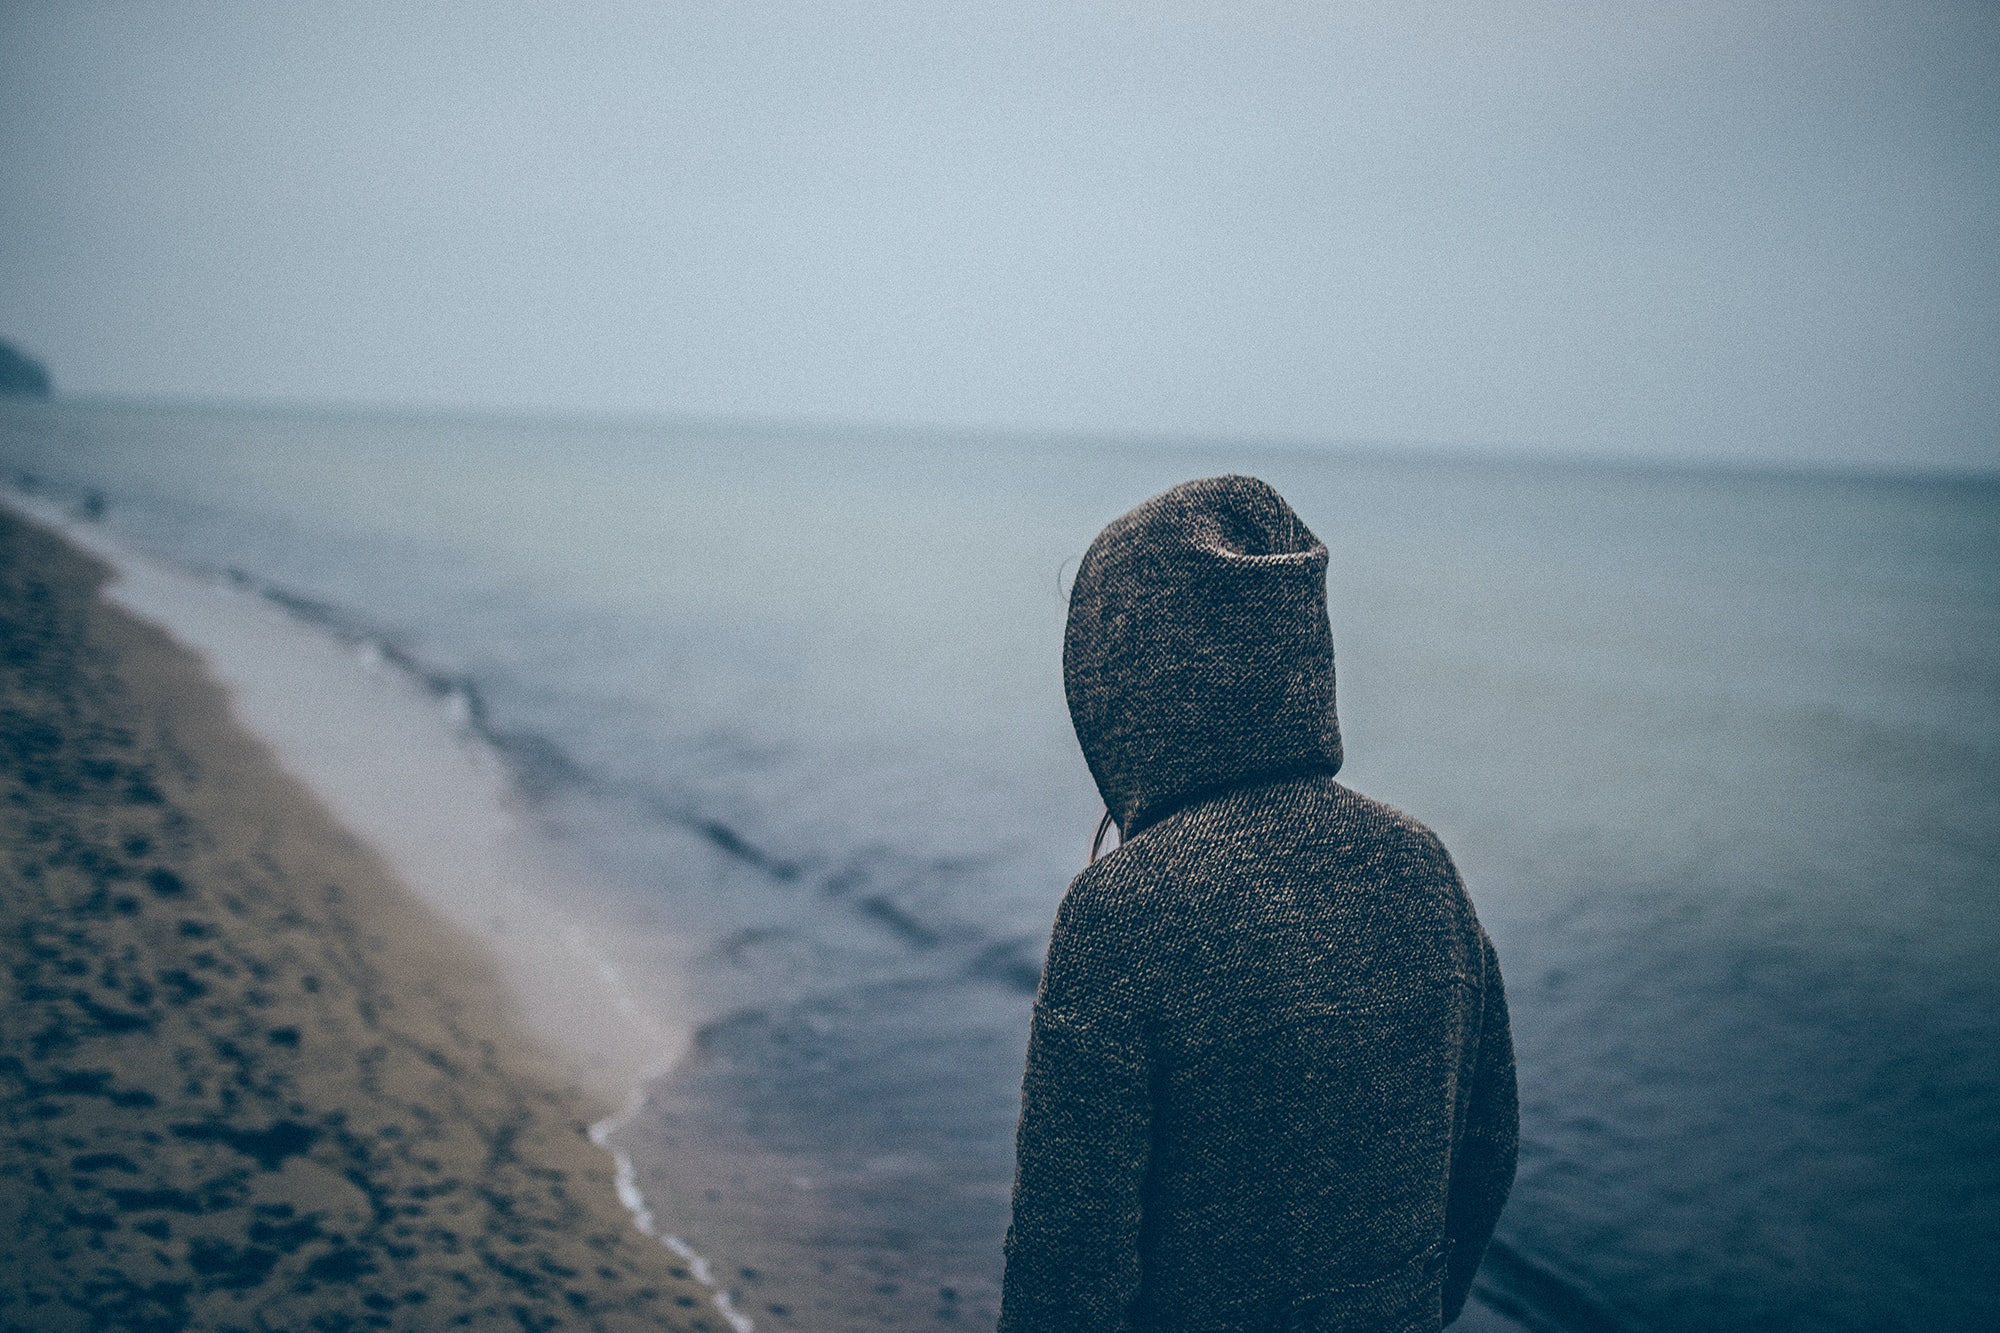 A hooded figure seen from behind walks along a grey and lonely shoreline.